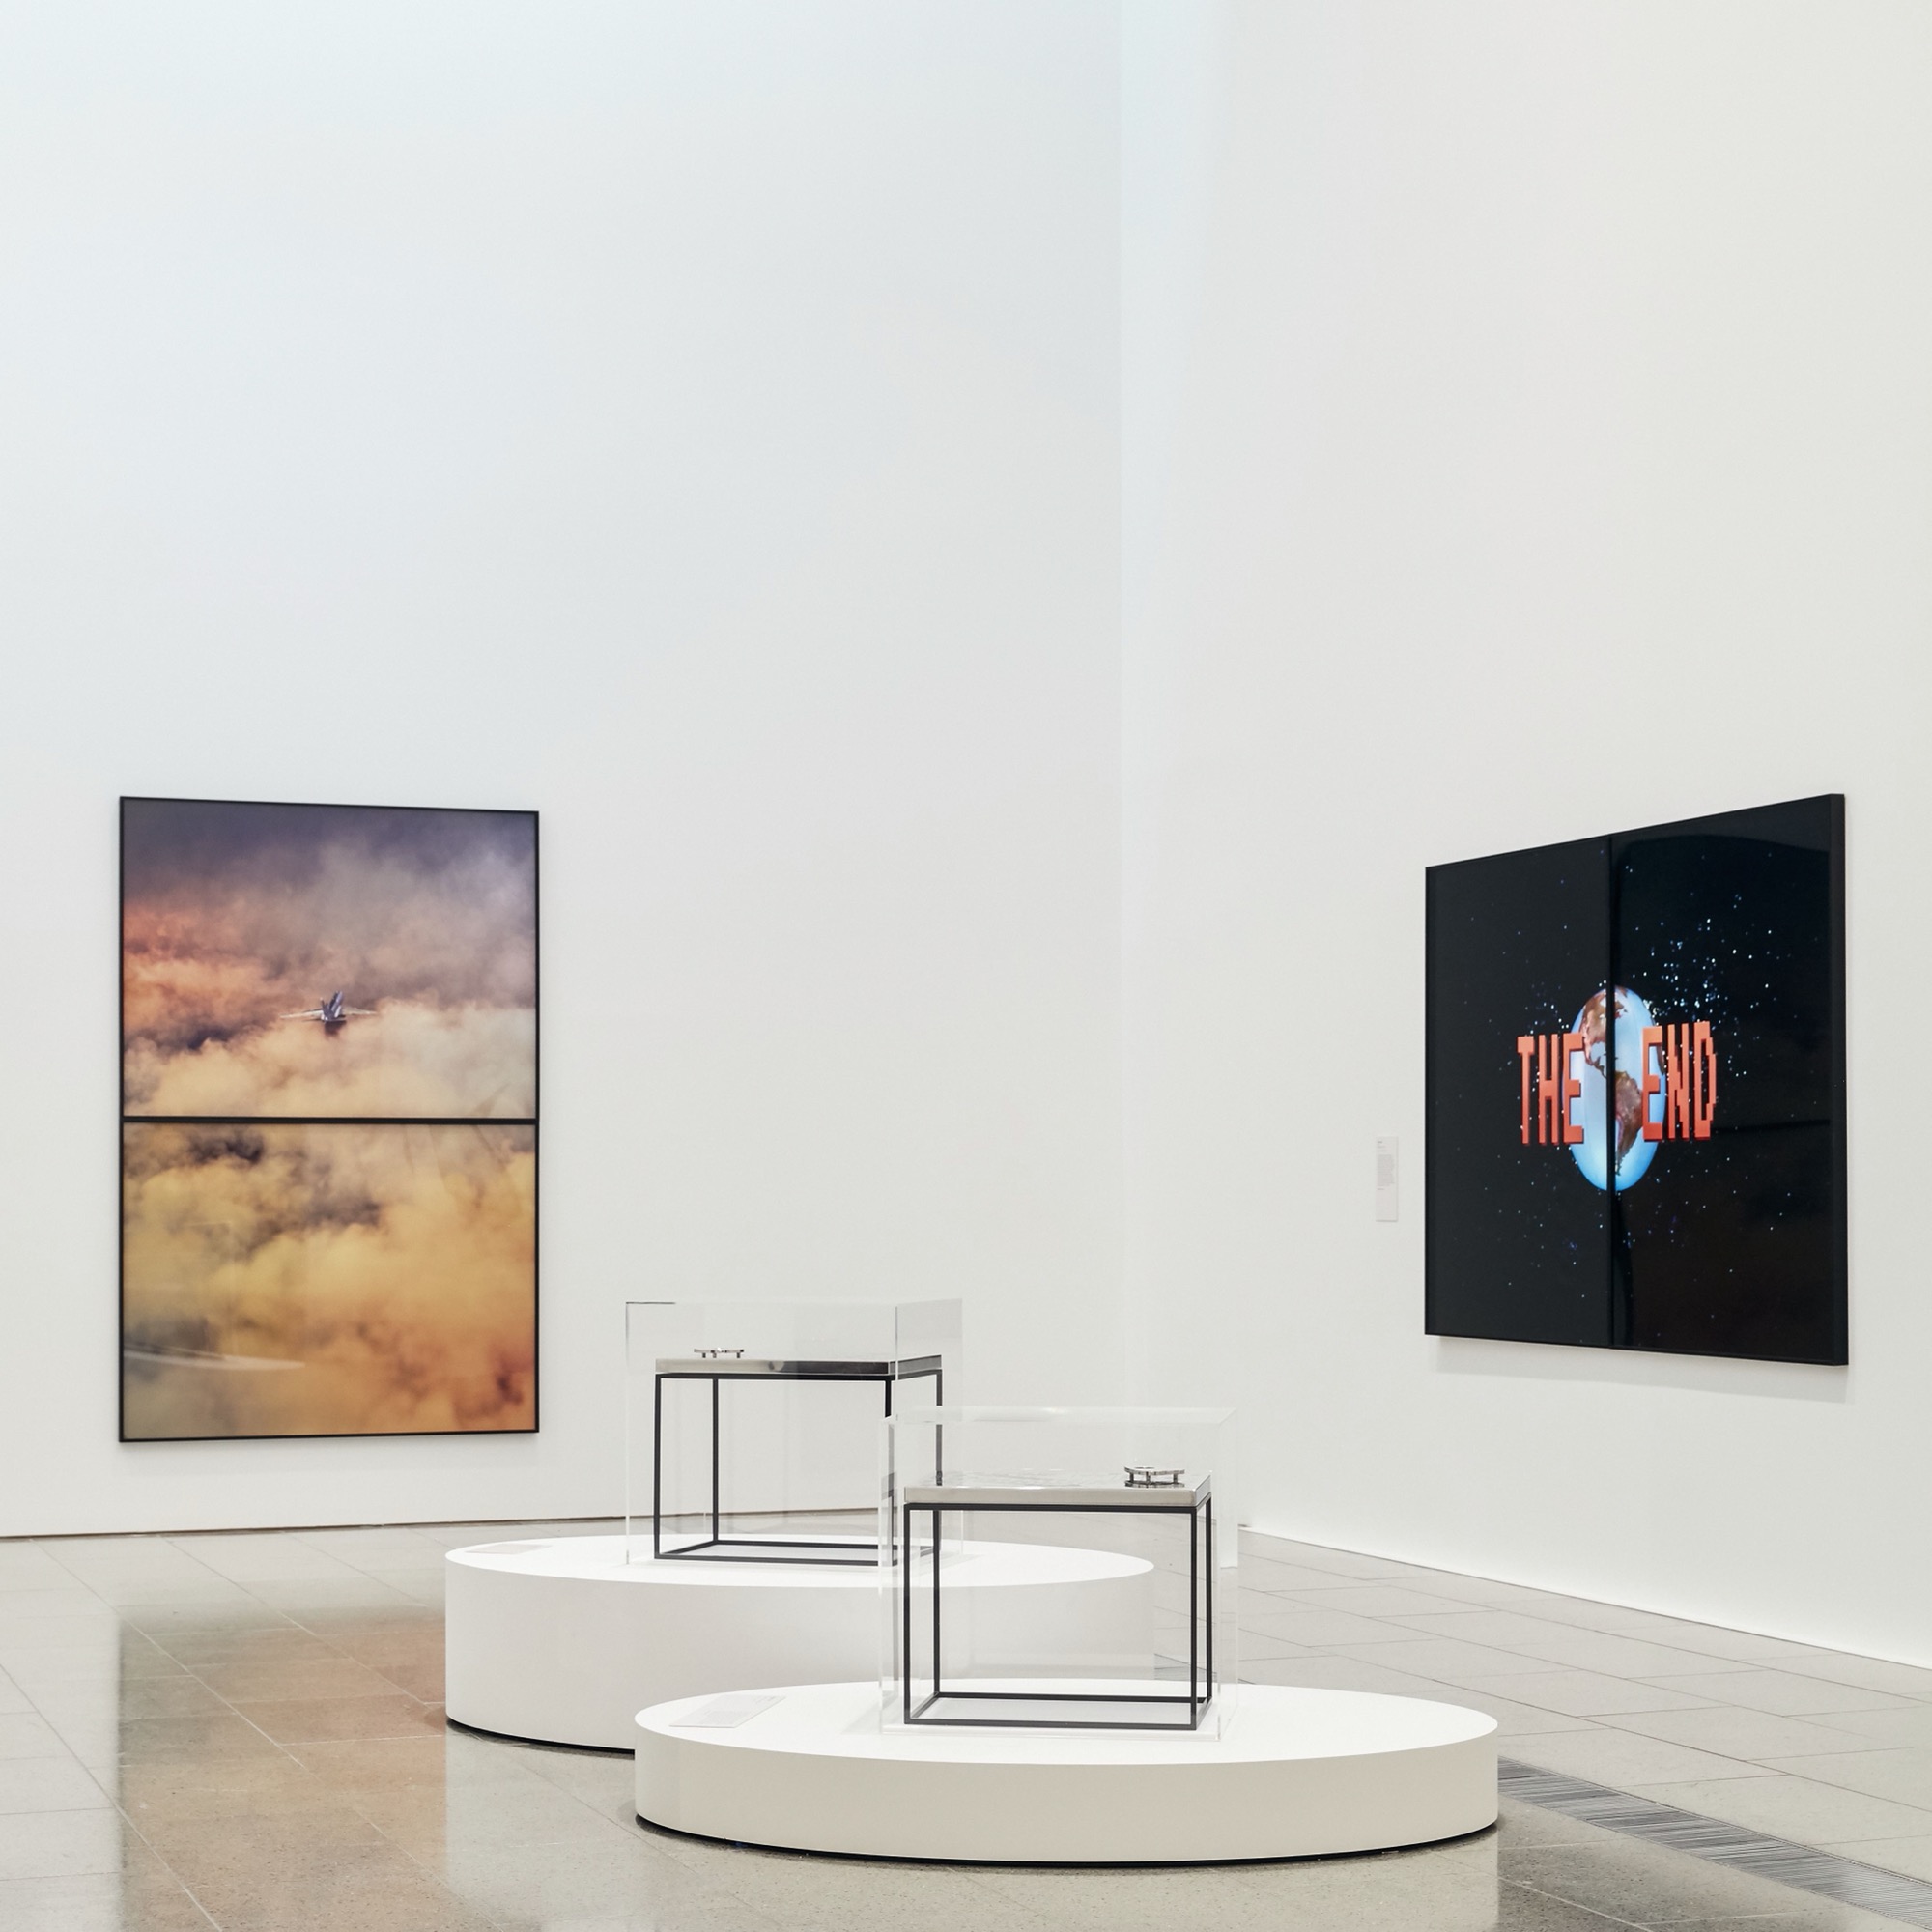 Installation view of <em>Darren Sylvester: Carve A Future, Devour Everything, Become Something</em> at The Ian Potter Centre: NGV Australia from 1 March – 30 June 2019. Photo: Tom Ross.